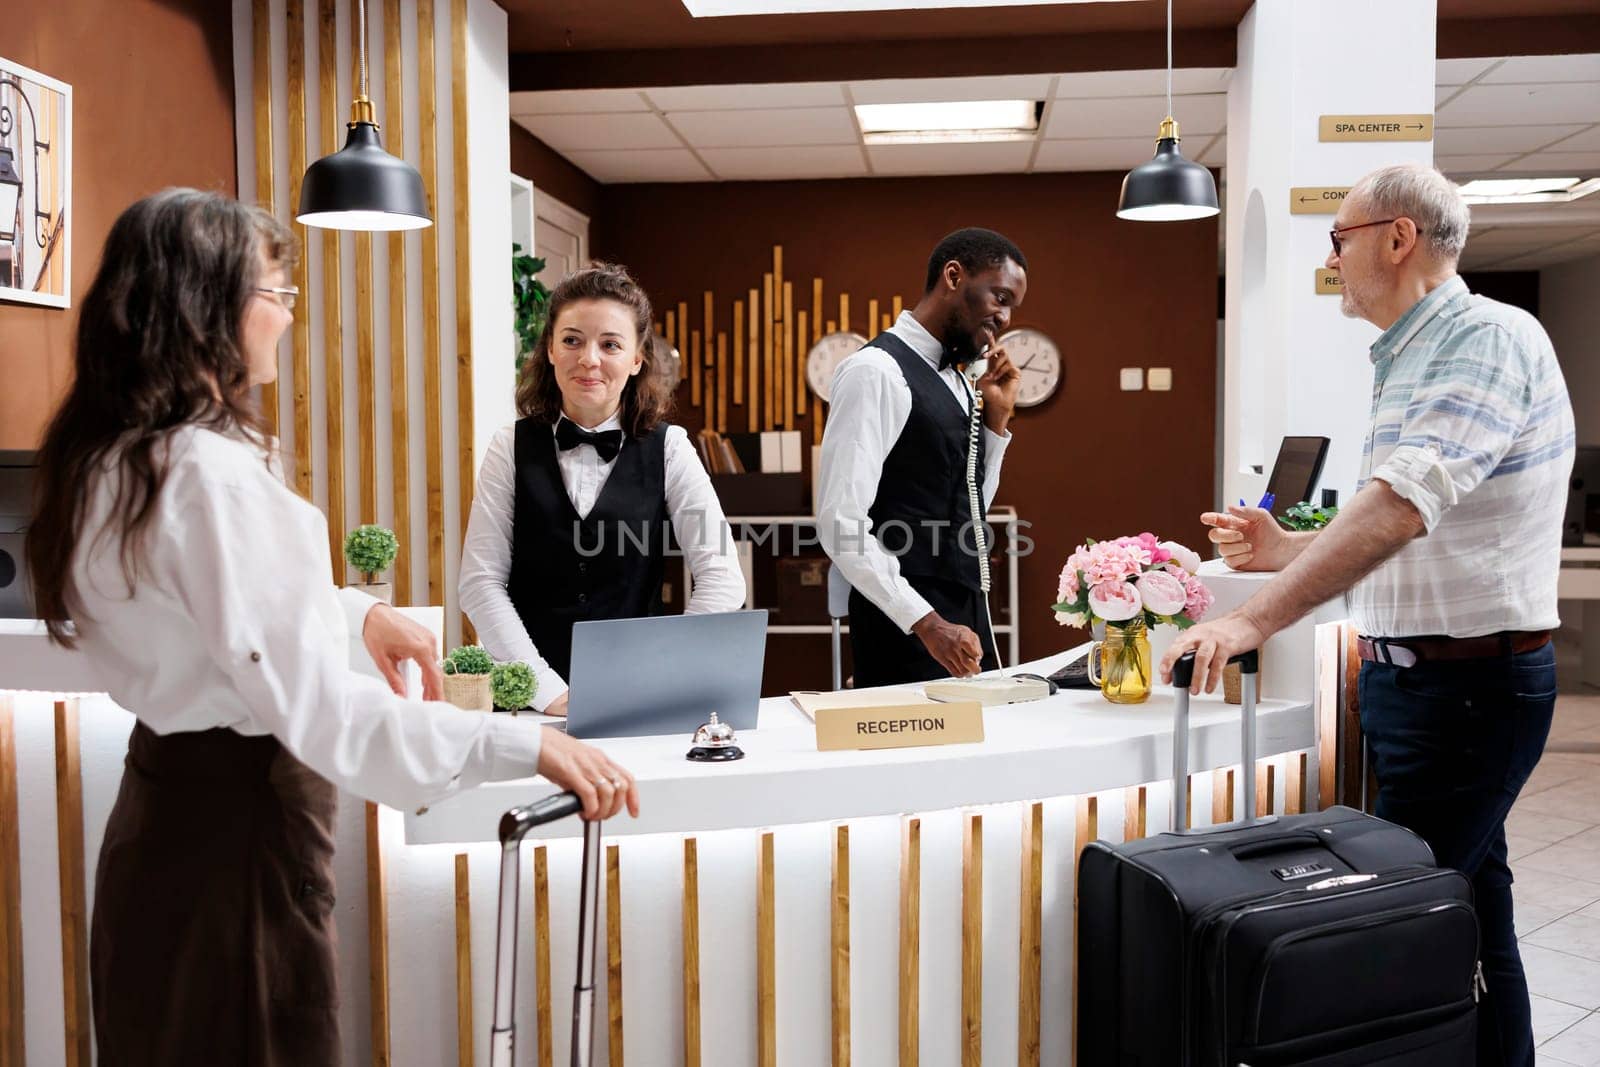 Two elderly travelers come at the hotel reception desk to check in. Multiethnic receptionists assist retired senior man and woman with booking and paperwork, therefore creating a pleasant environment.